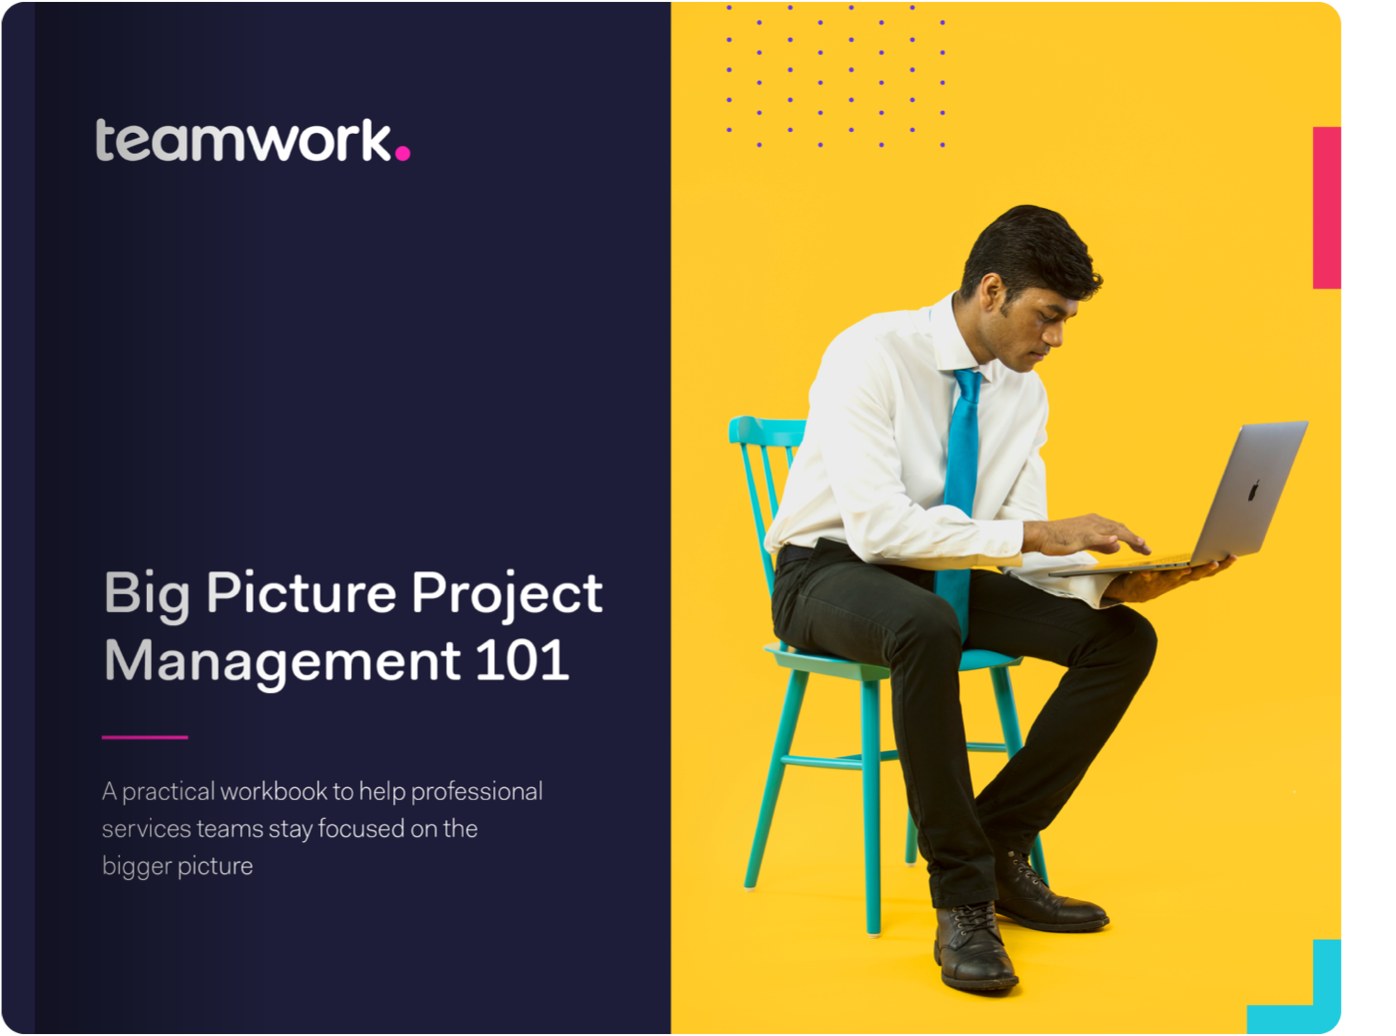 The big picture project management workbook